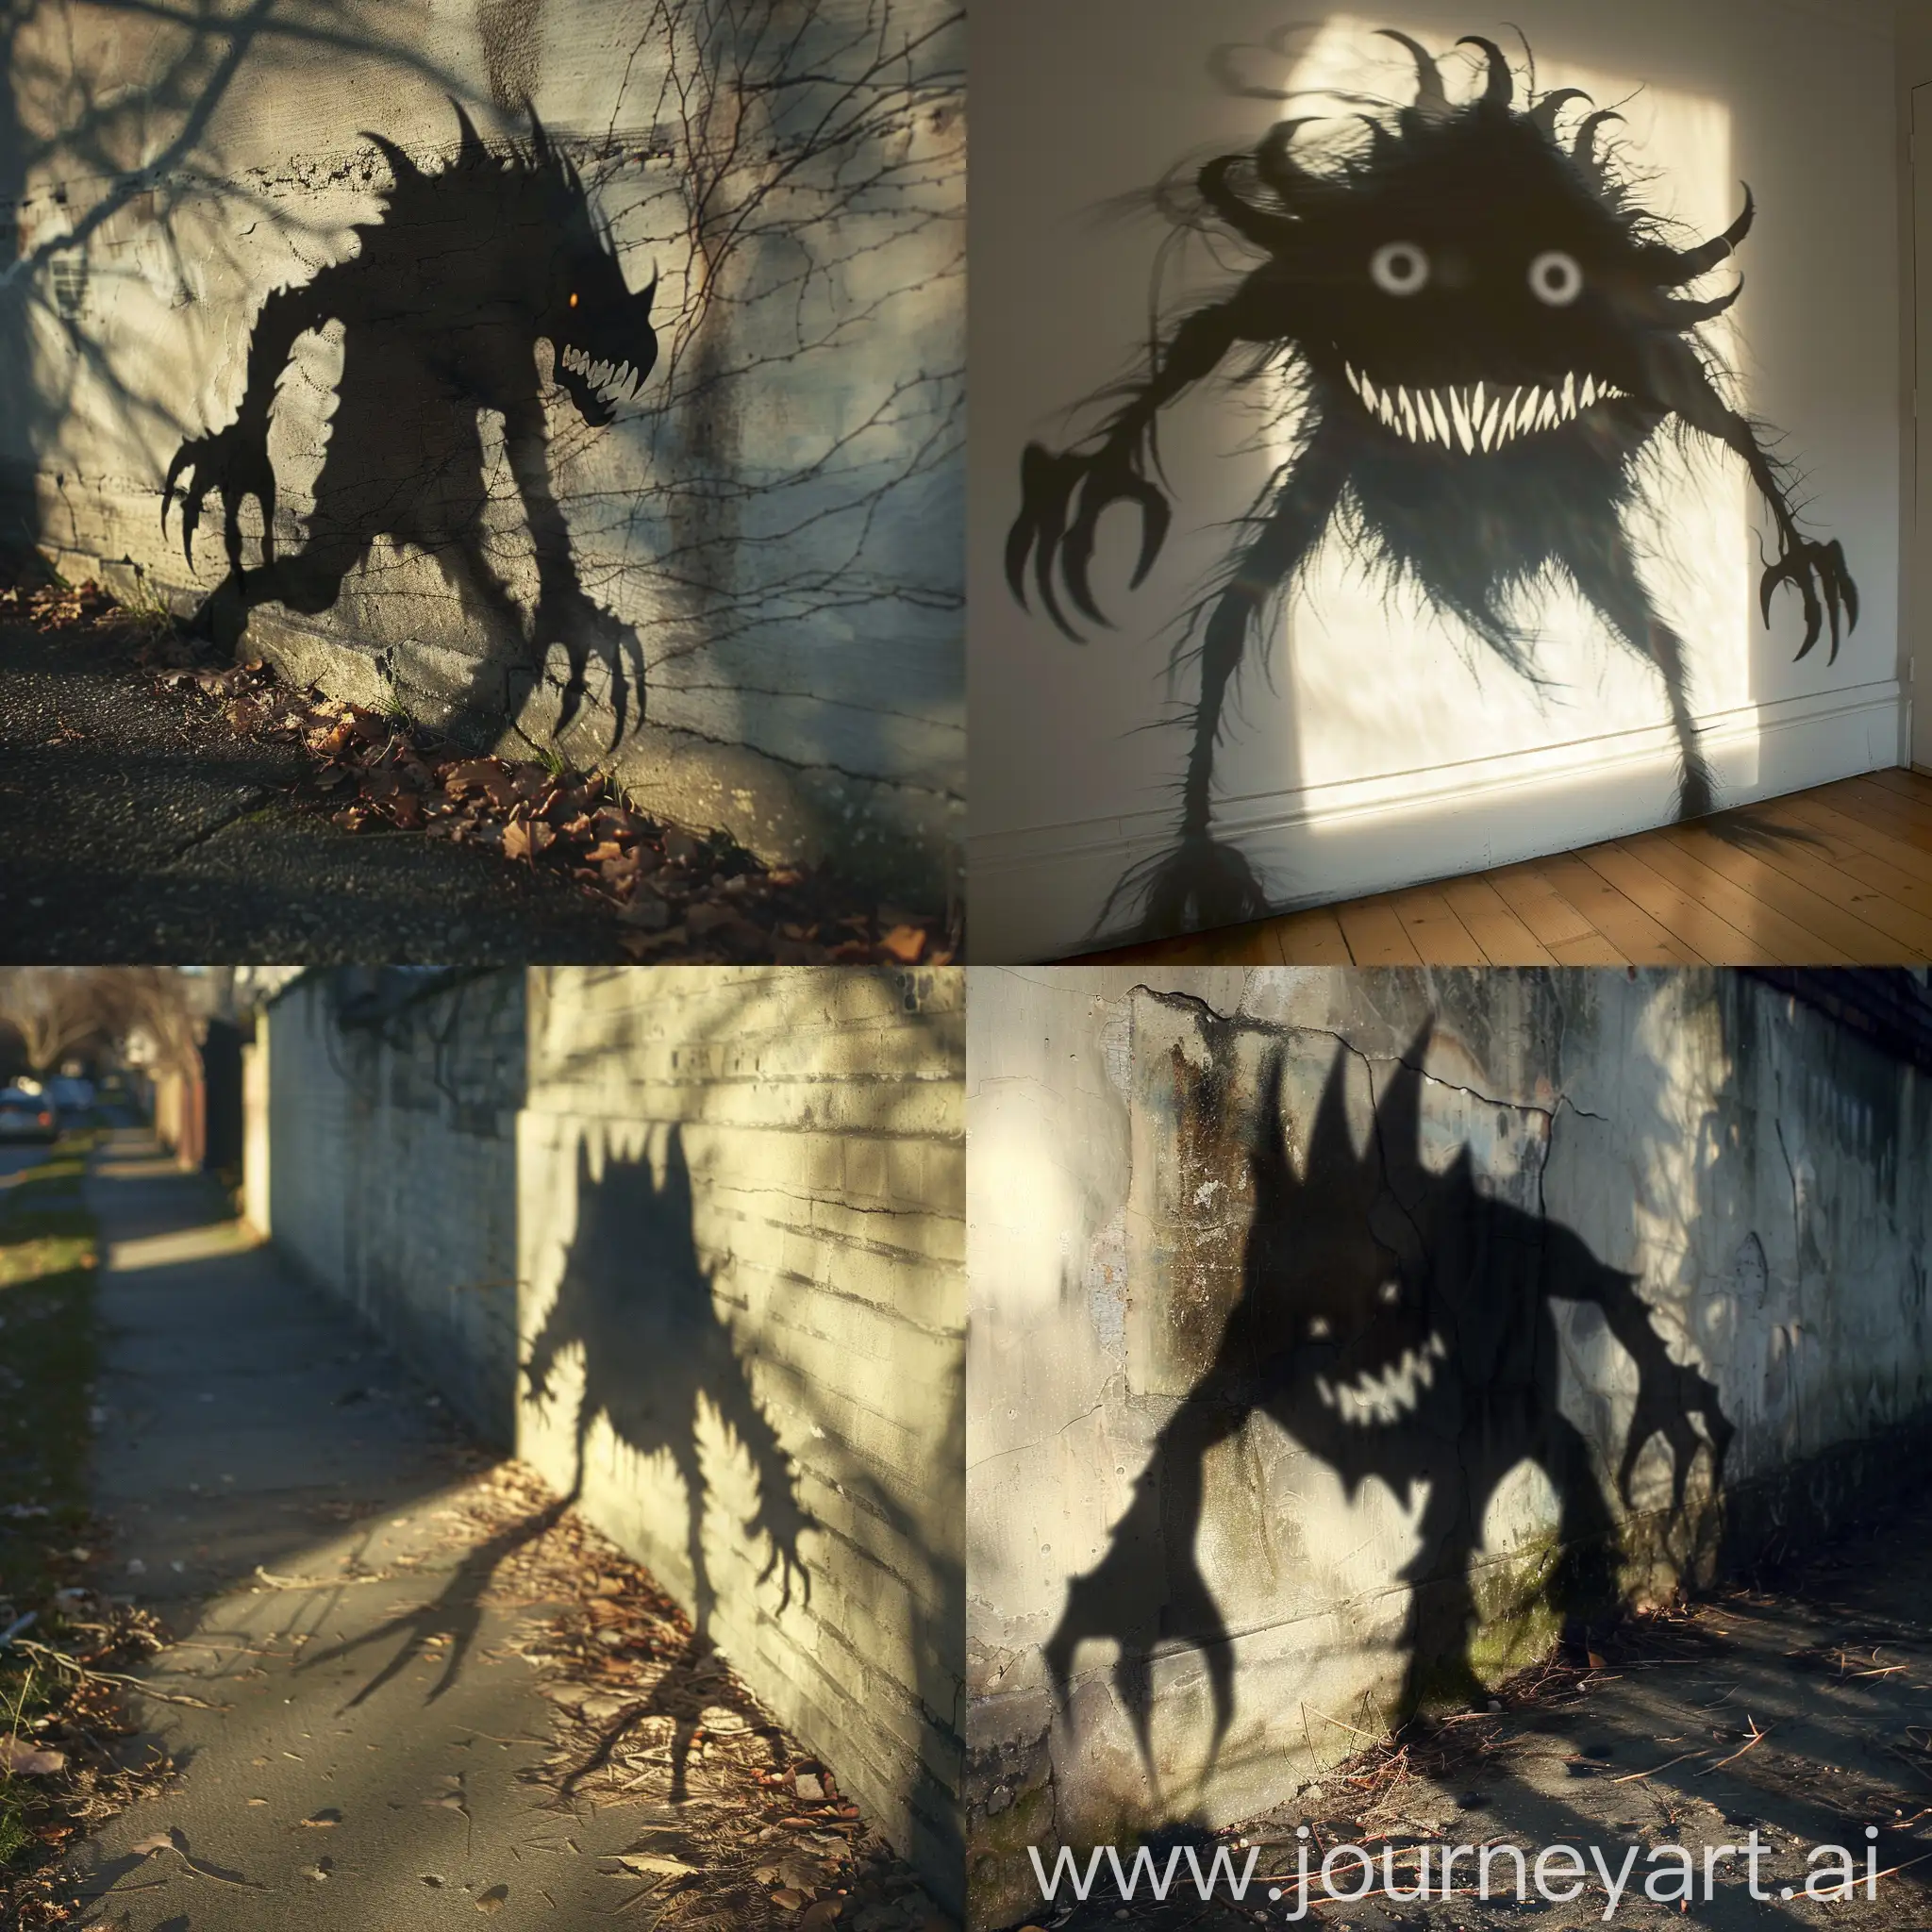 shadow monster
